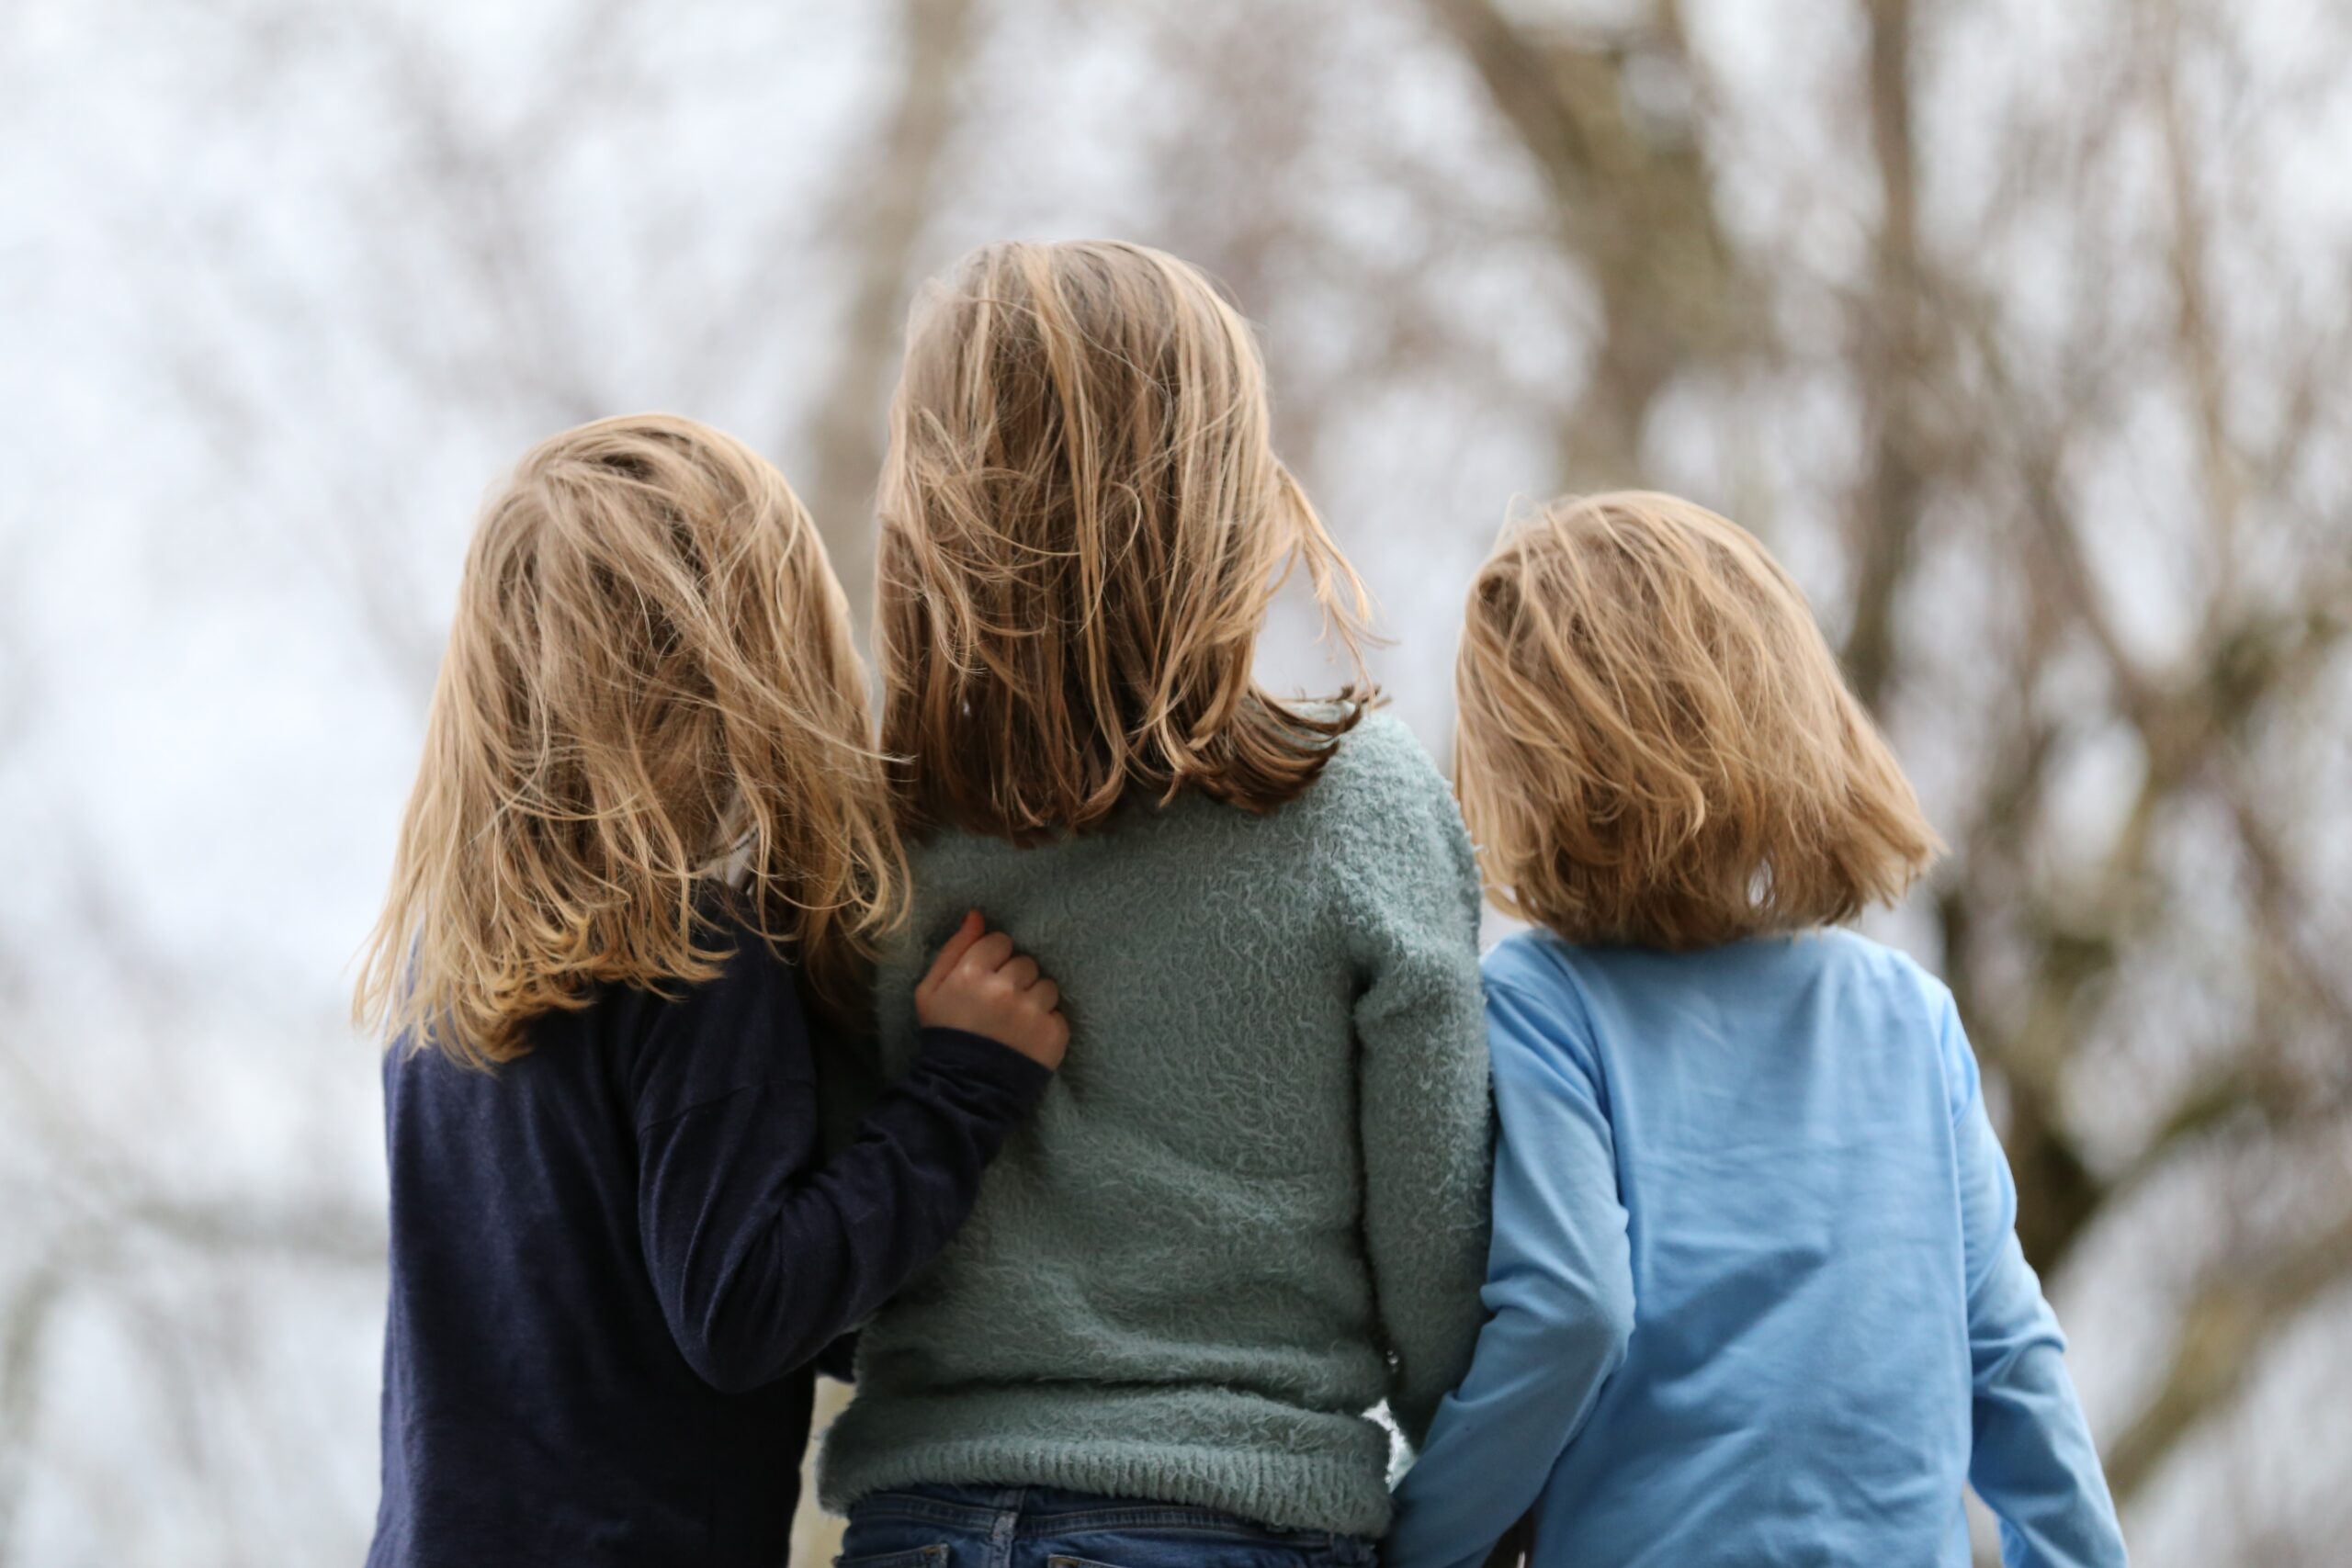 Sibling Empathy and Compassion